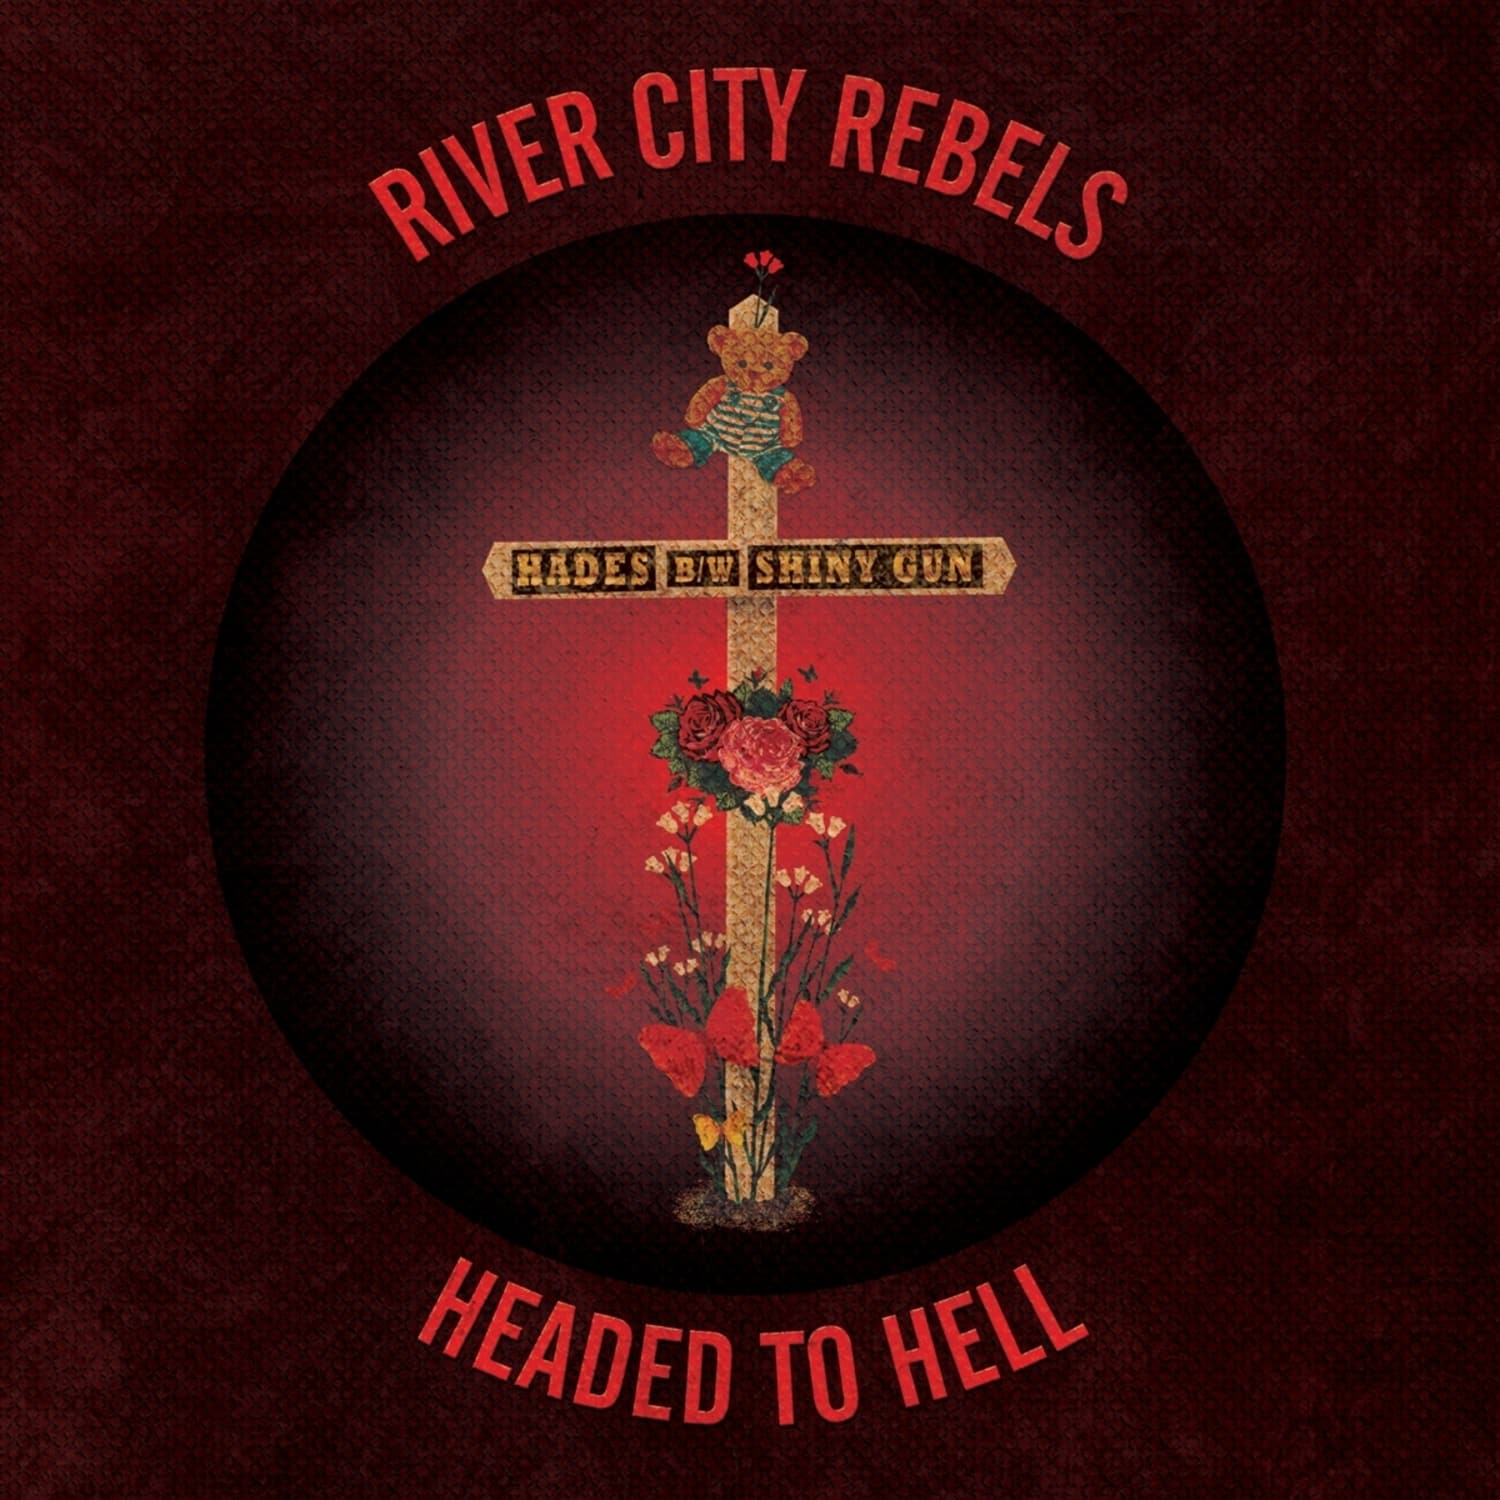 River City Rebels - 7-HEADED TO HELL 